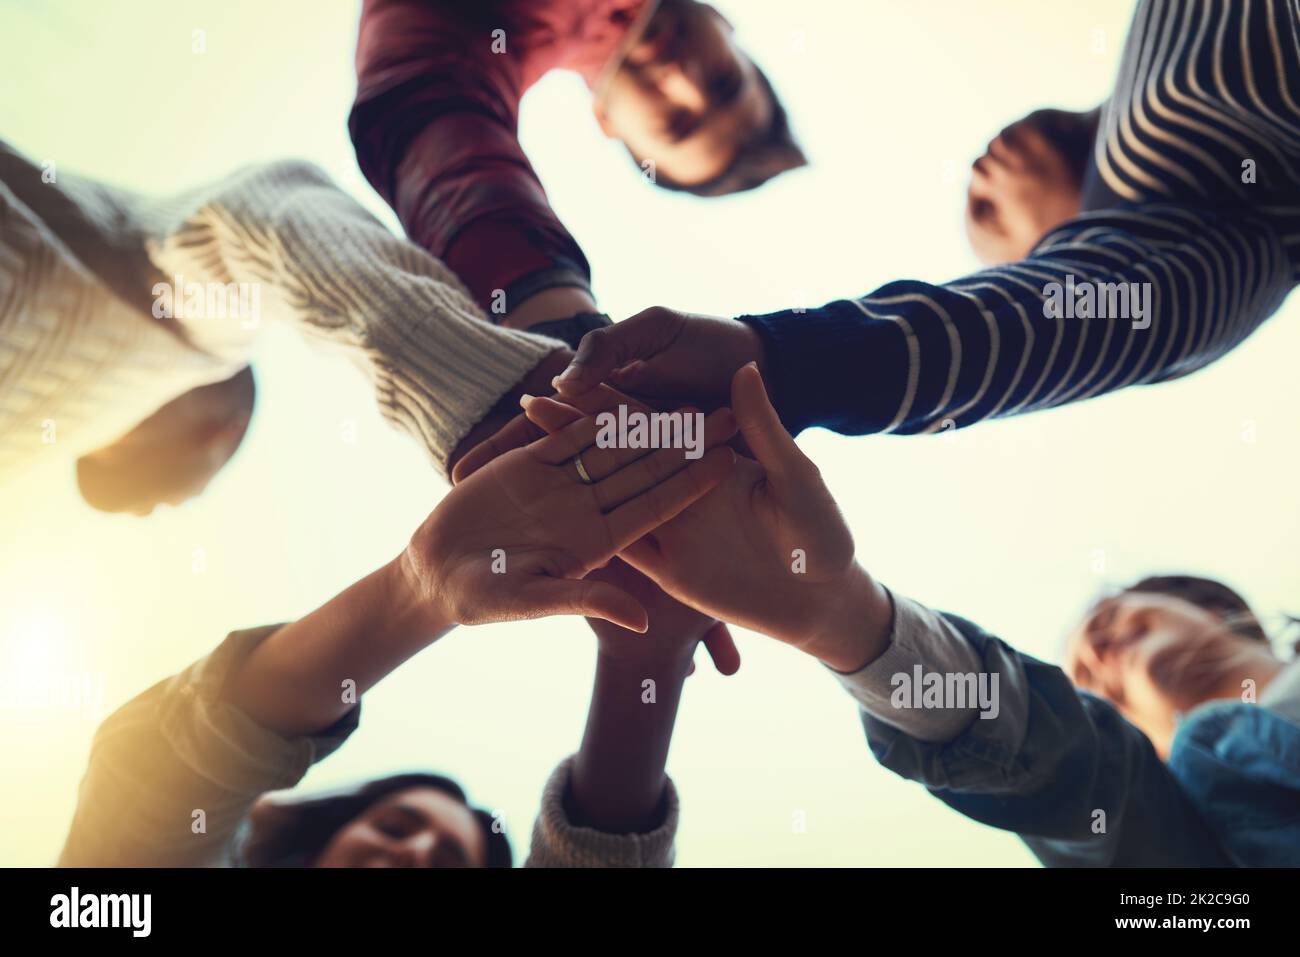 True friends stick together. Low angle shot of a group of students joining their hands in solidarity. Stock Photo